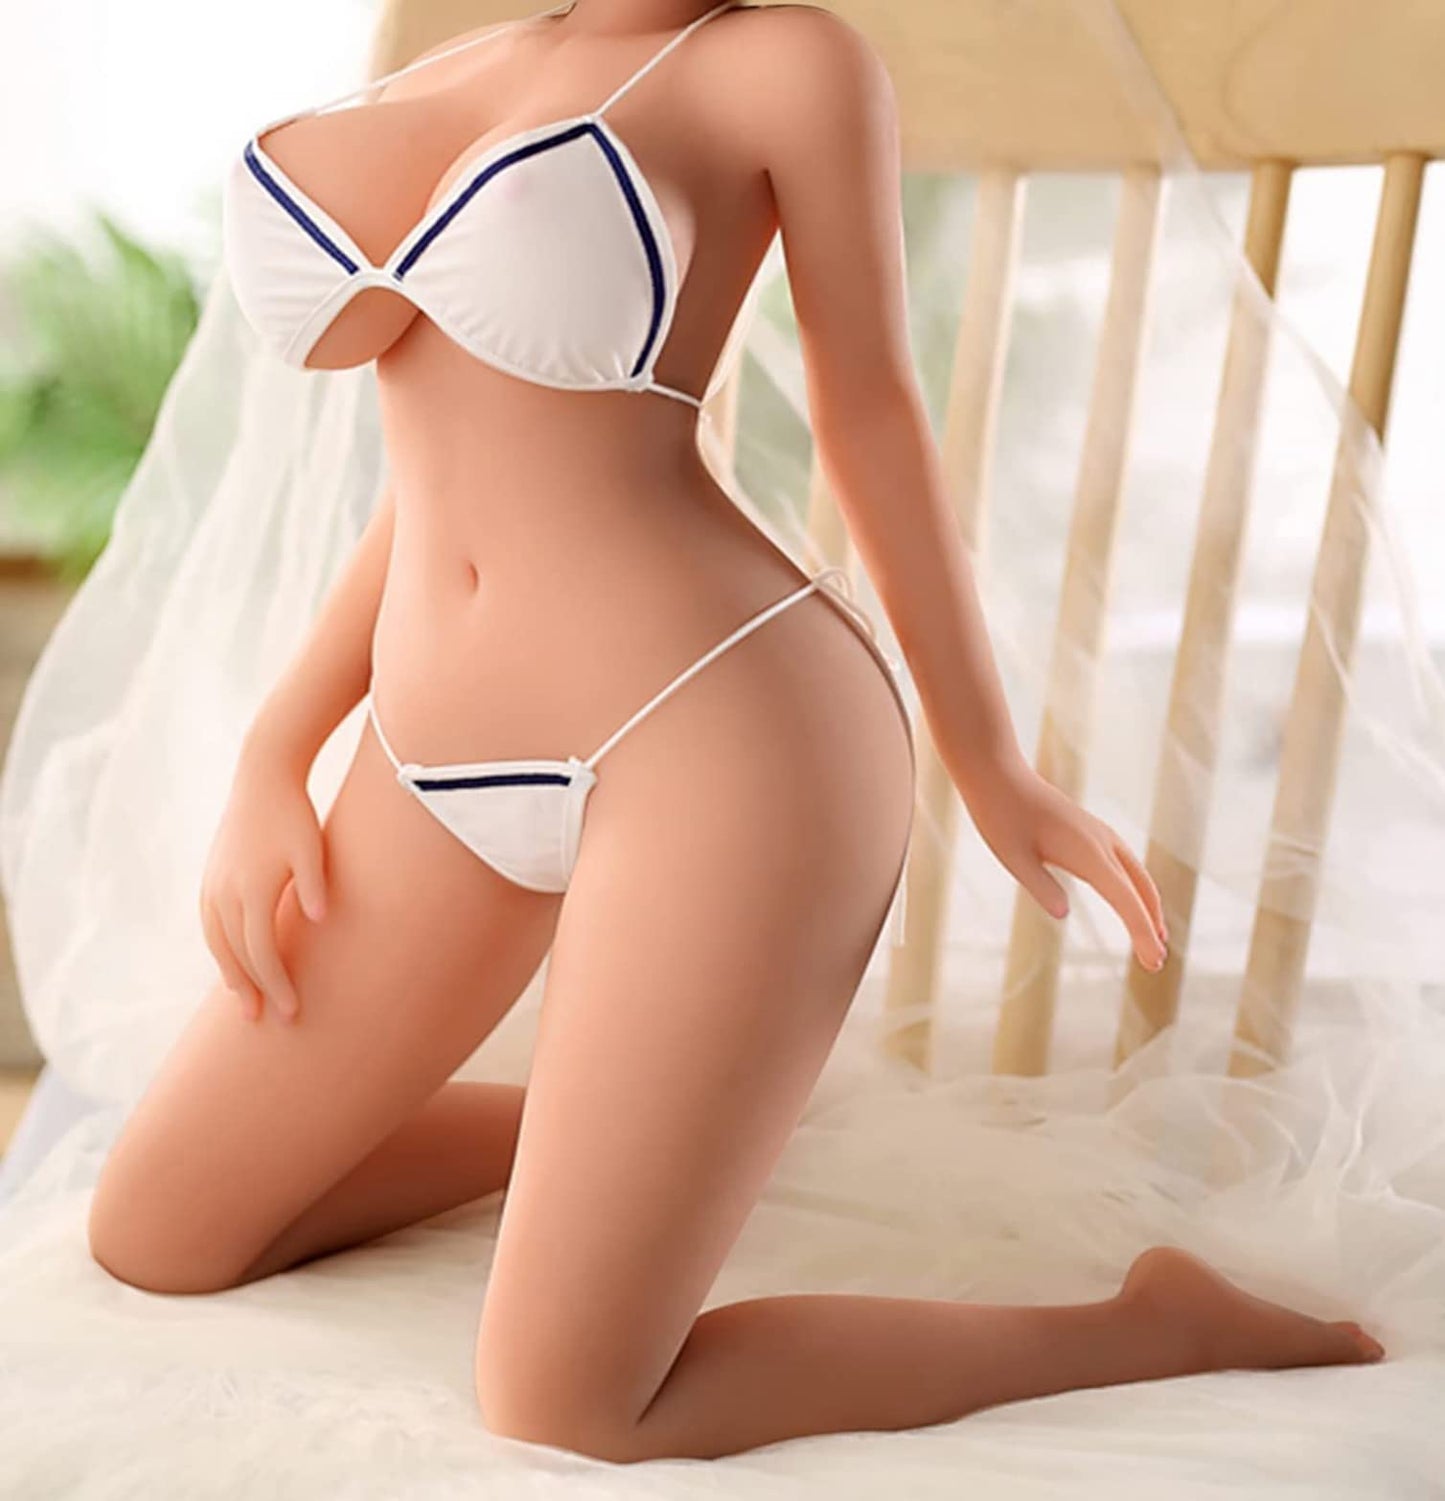 Lifelike Full Size Sex Doll with Big Breasts and Realistic Pussy, Full Body TPE Solid Silicone Female Torso Love Doll for Men Masturbation Sex Toys